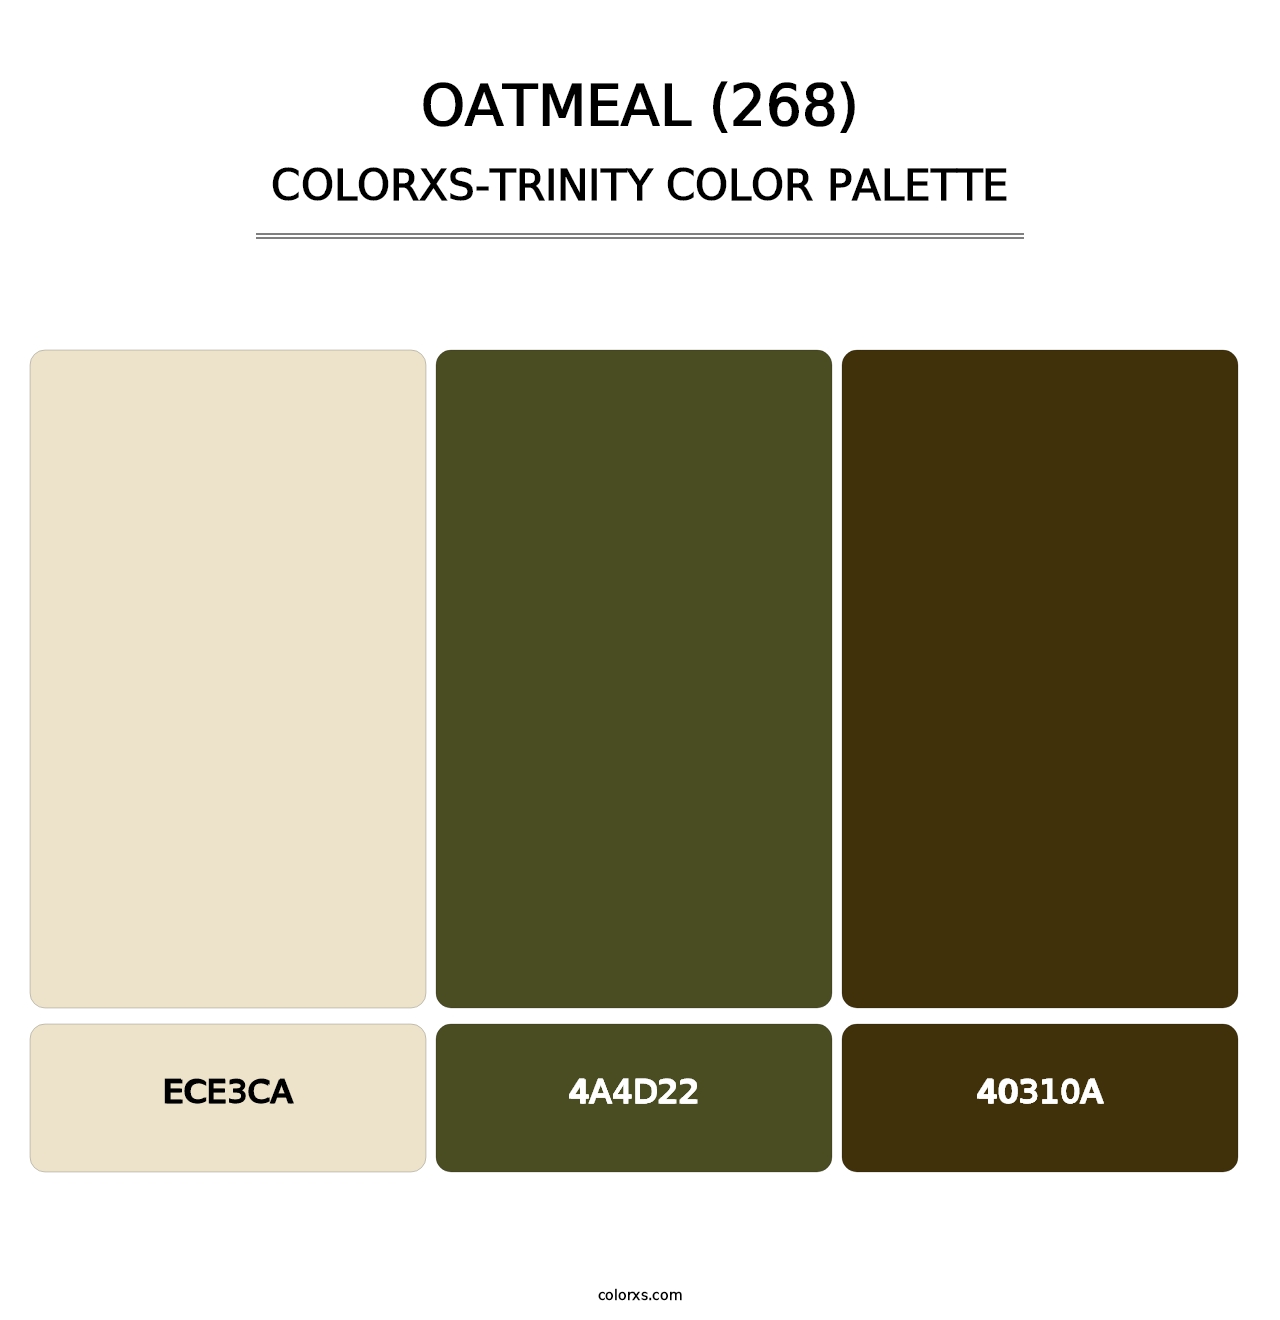 Oatmeal (268) - Colorxs Trinity Palette